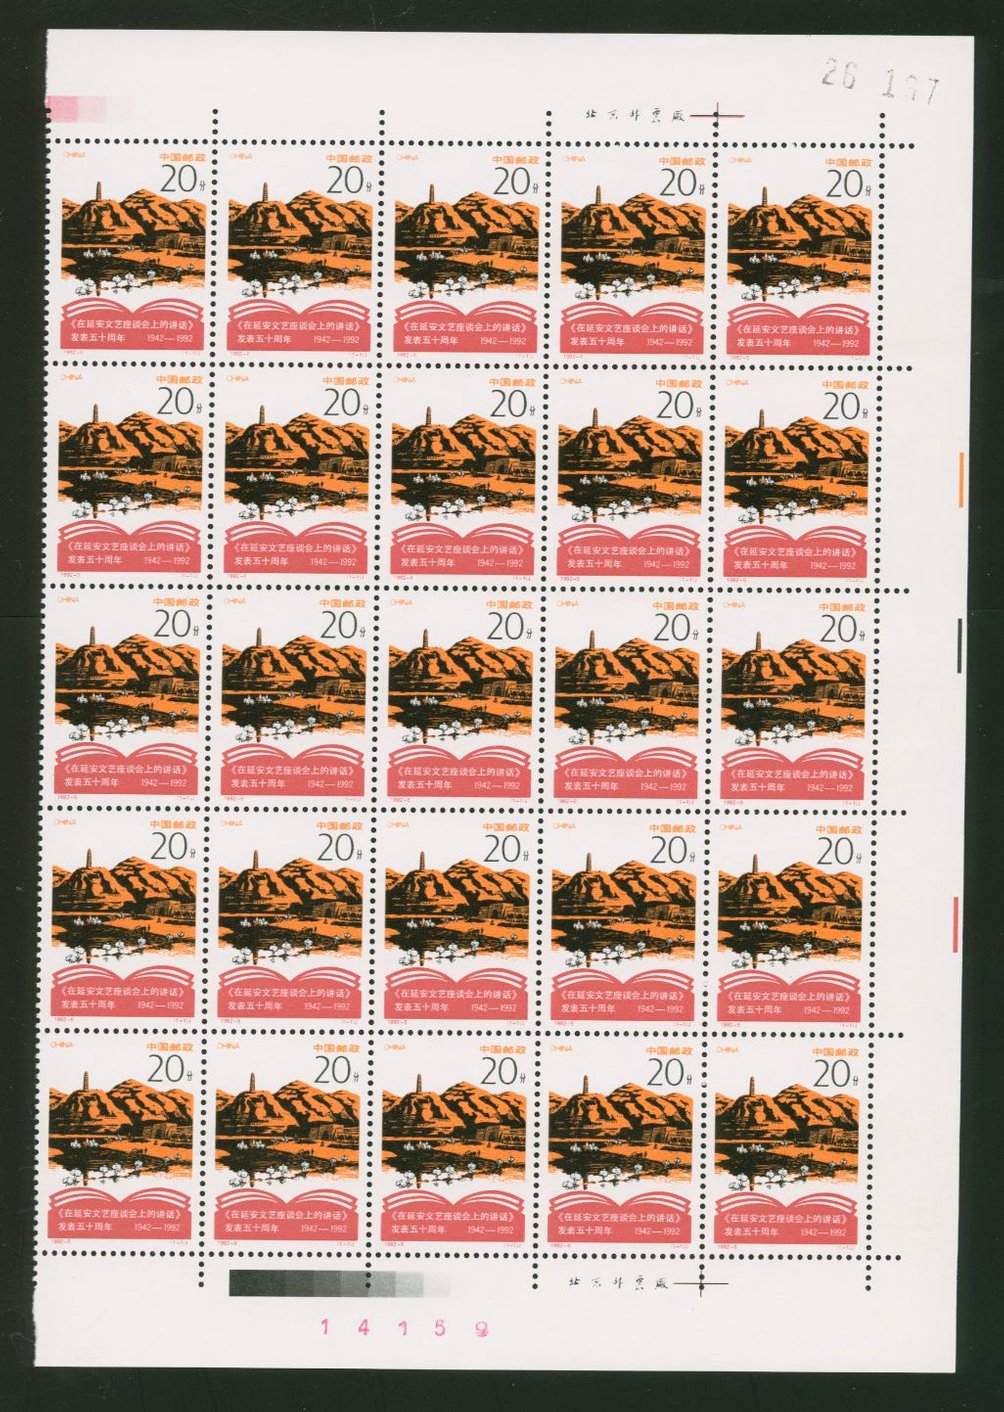 2390 PRC 1992-5 in panes of 25 (5 x 5)